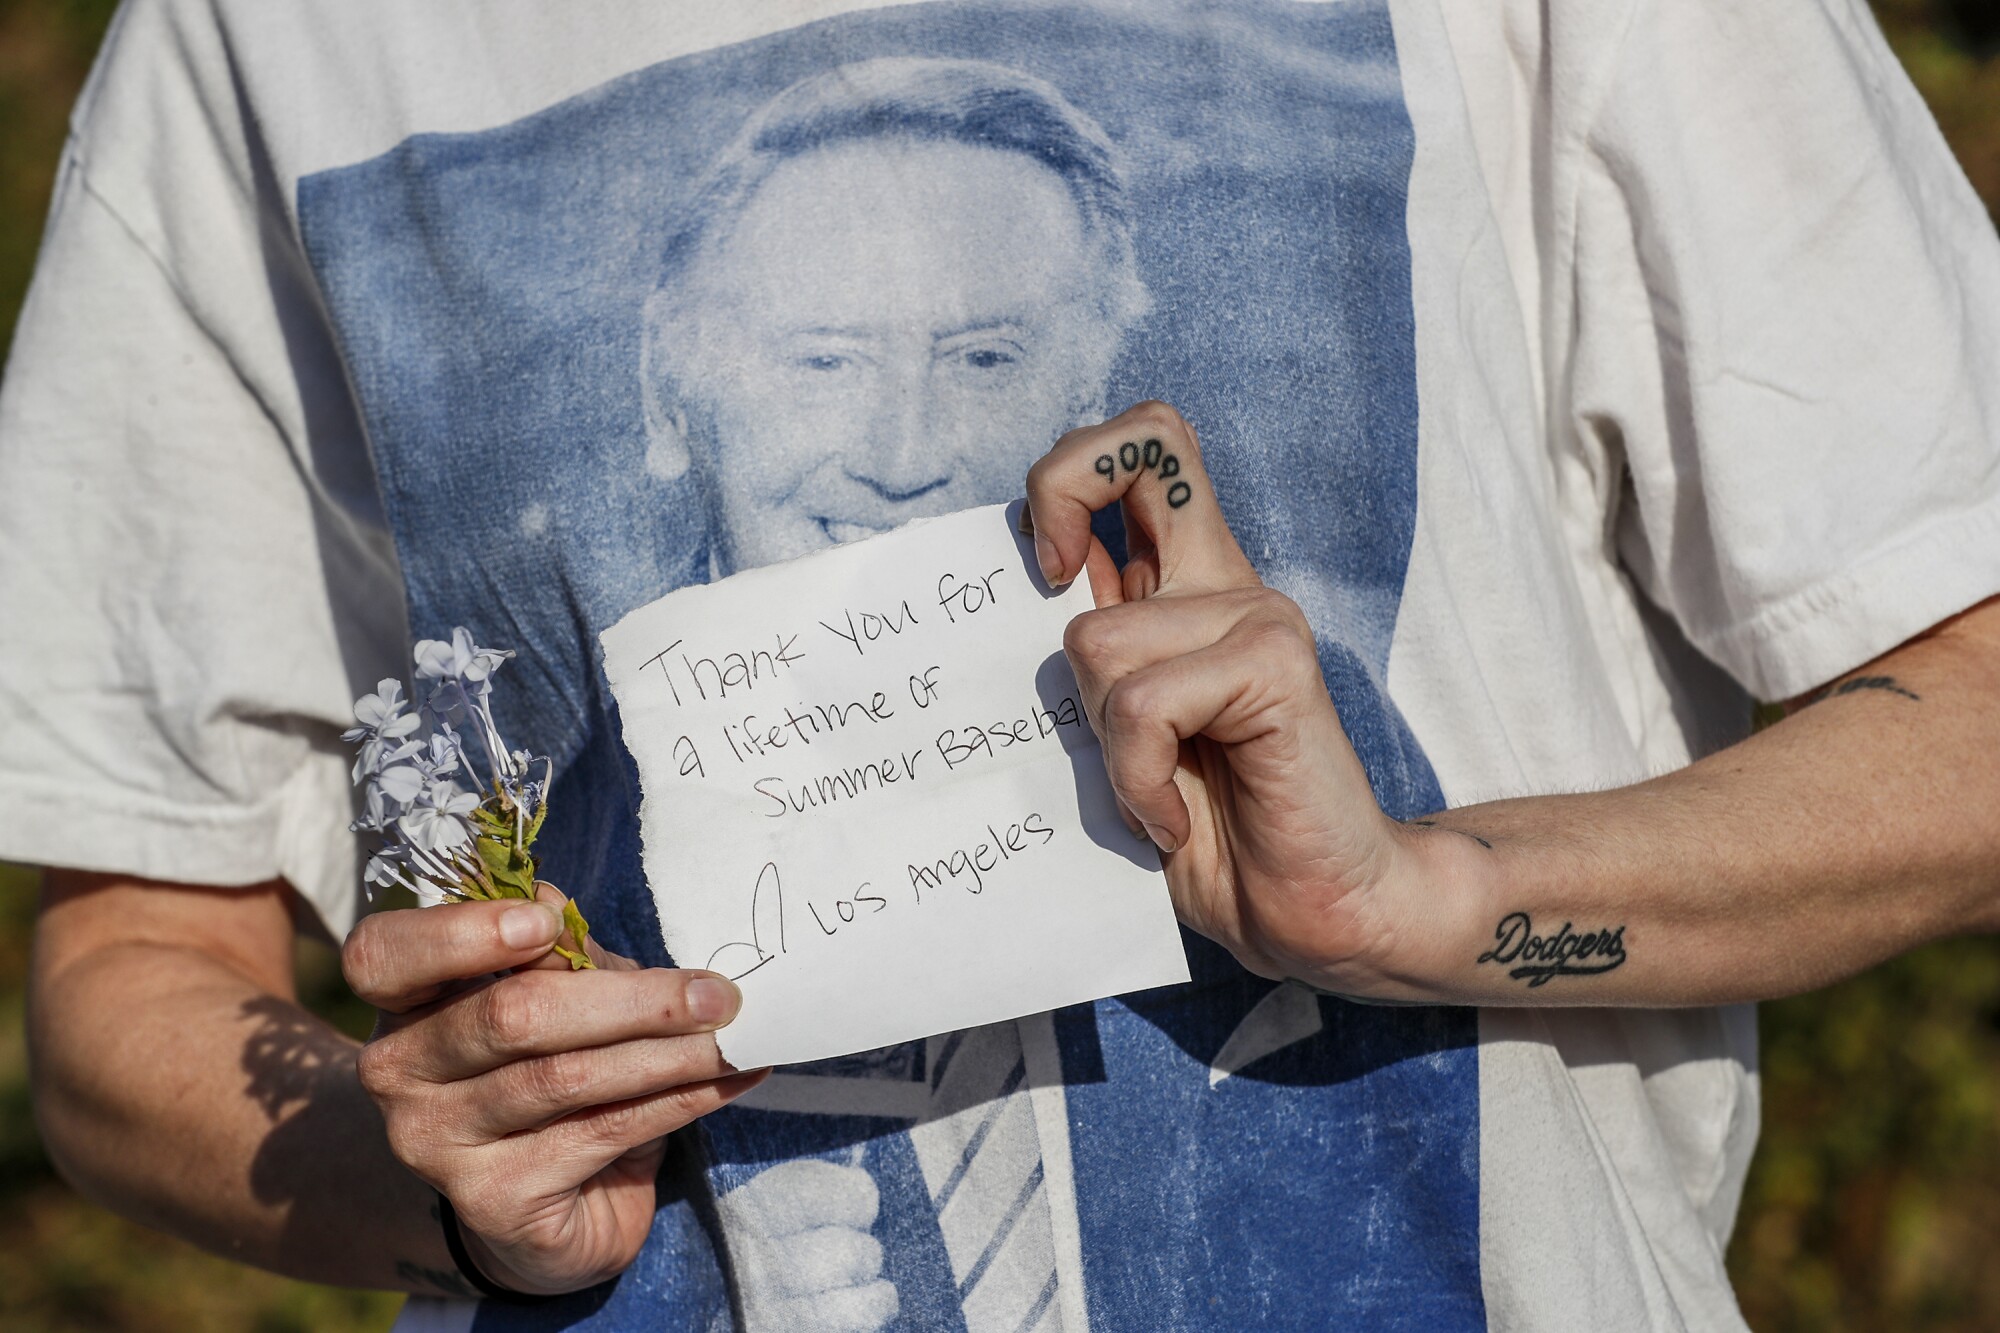 Meagan Newhouse shows a note and flowers she would leave at a shrine to Dodgers announcer Vin Scully.